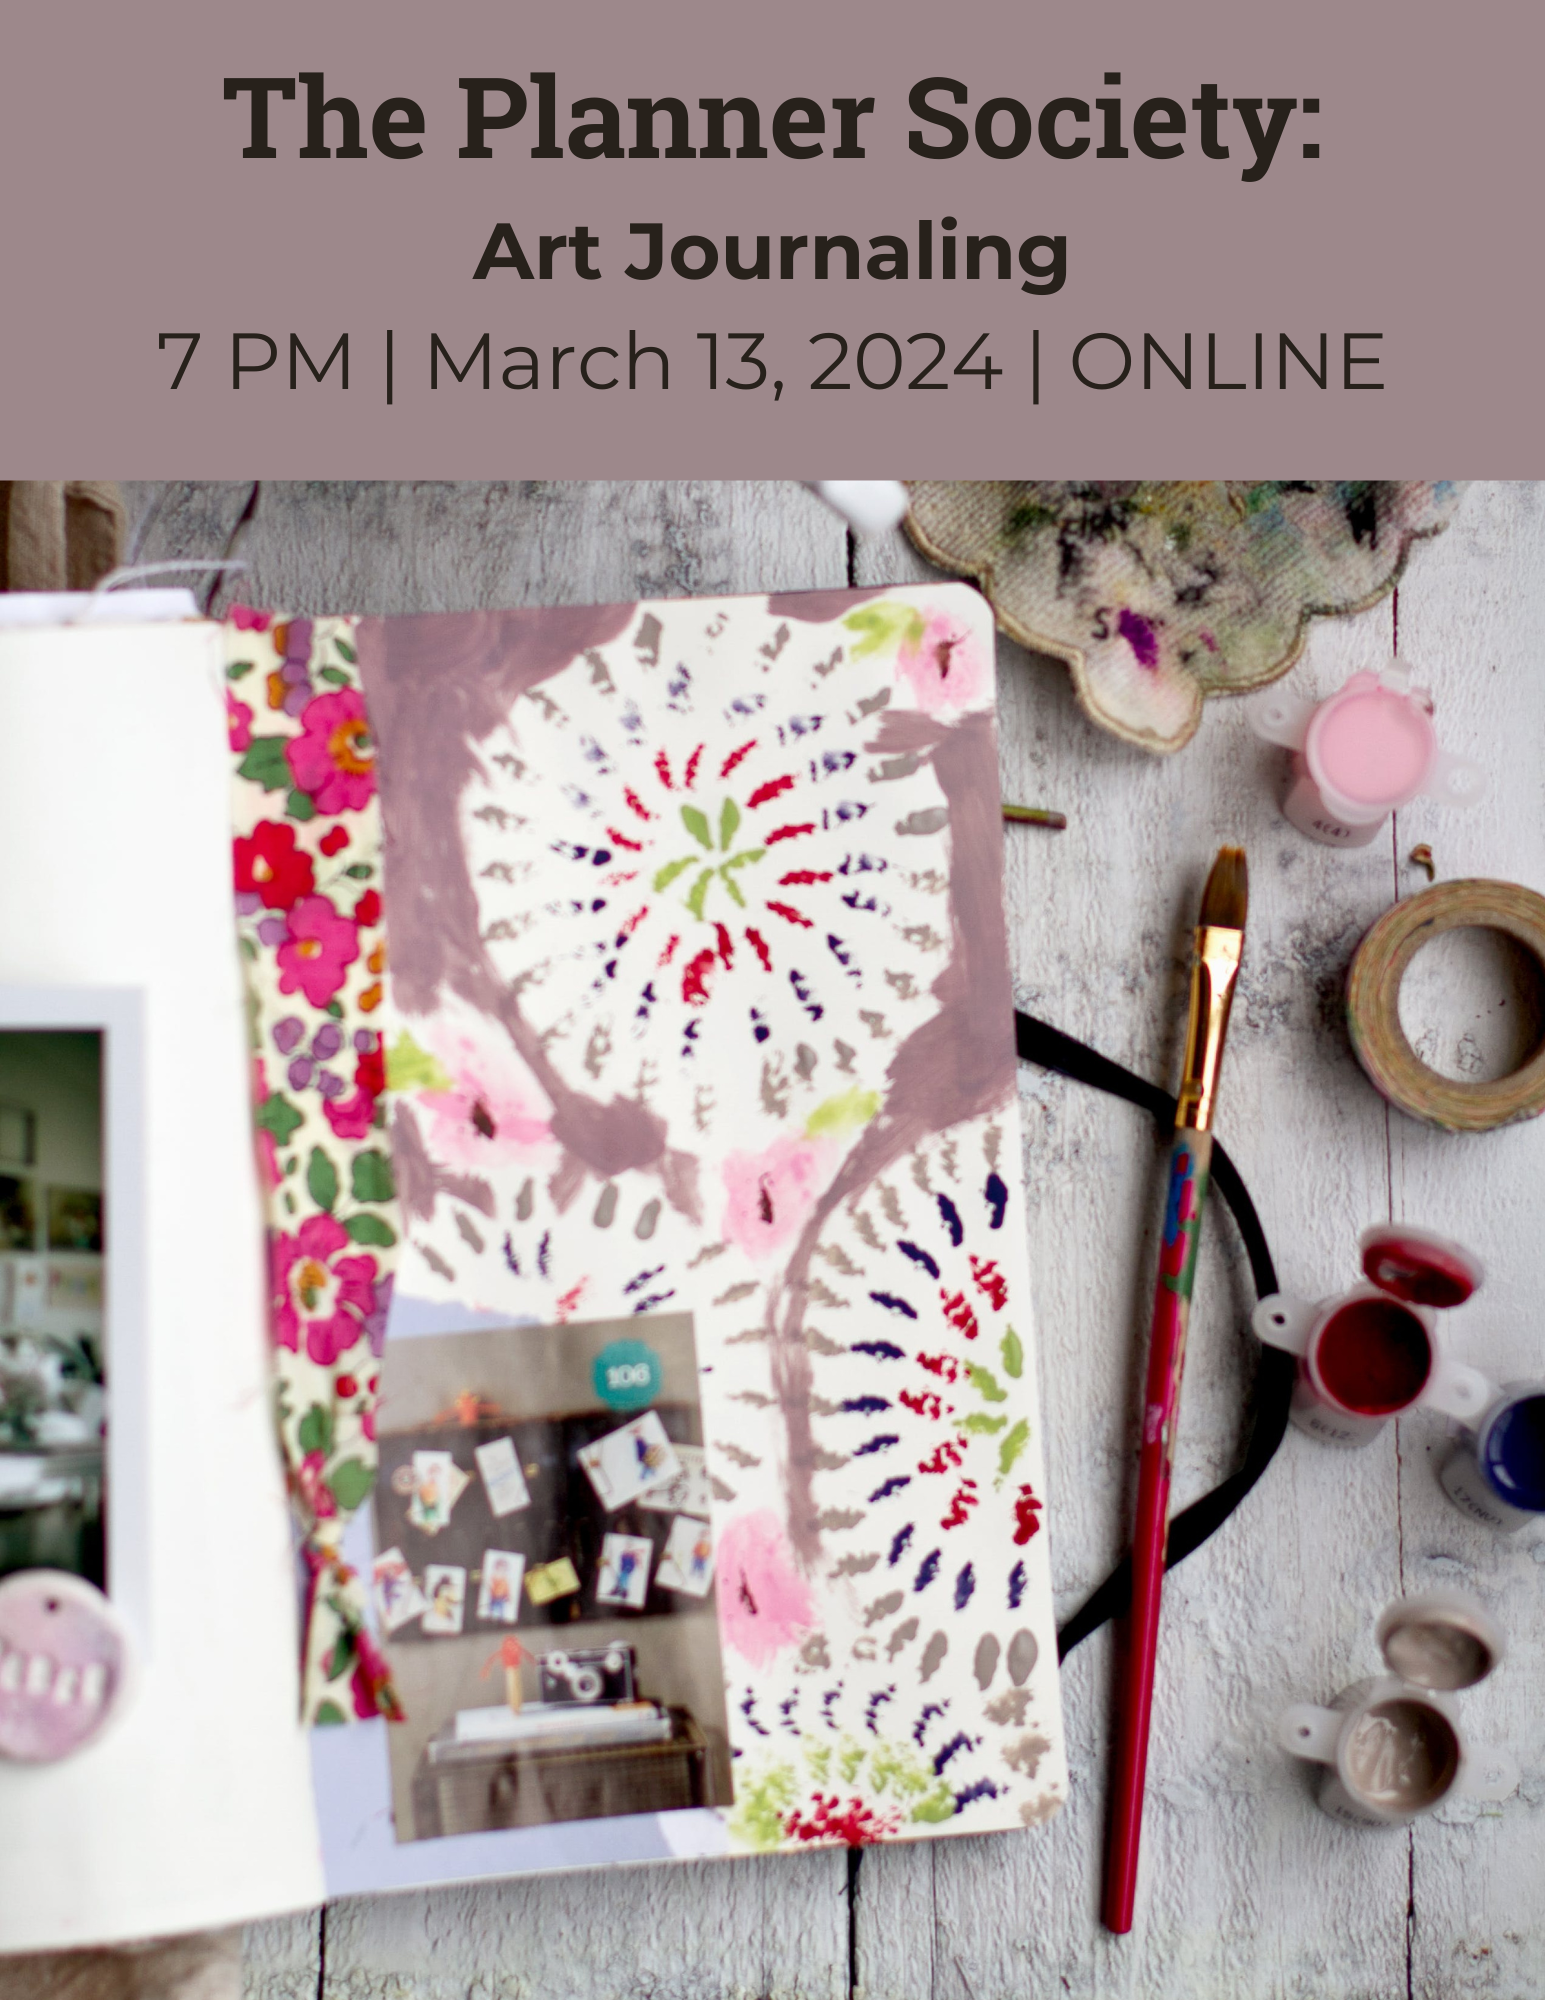 The Planner Society Art Journaling Wednesday March 15, 2024 7 PM Online paintbrush, individual pain pots and journal